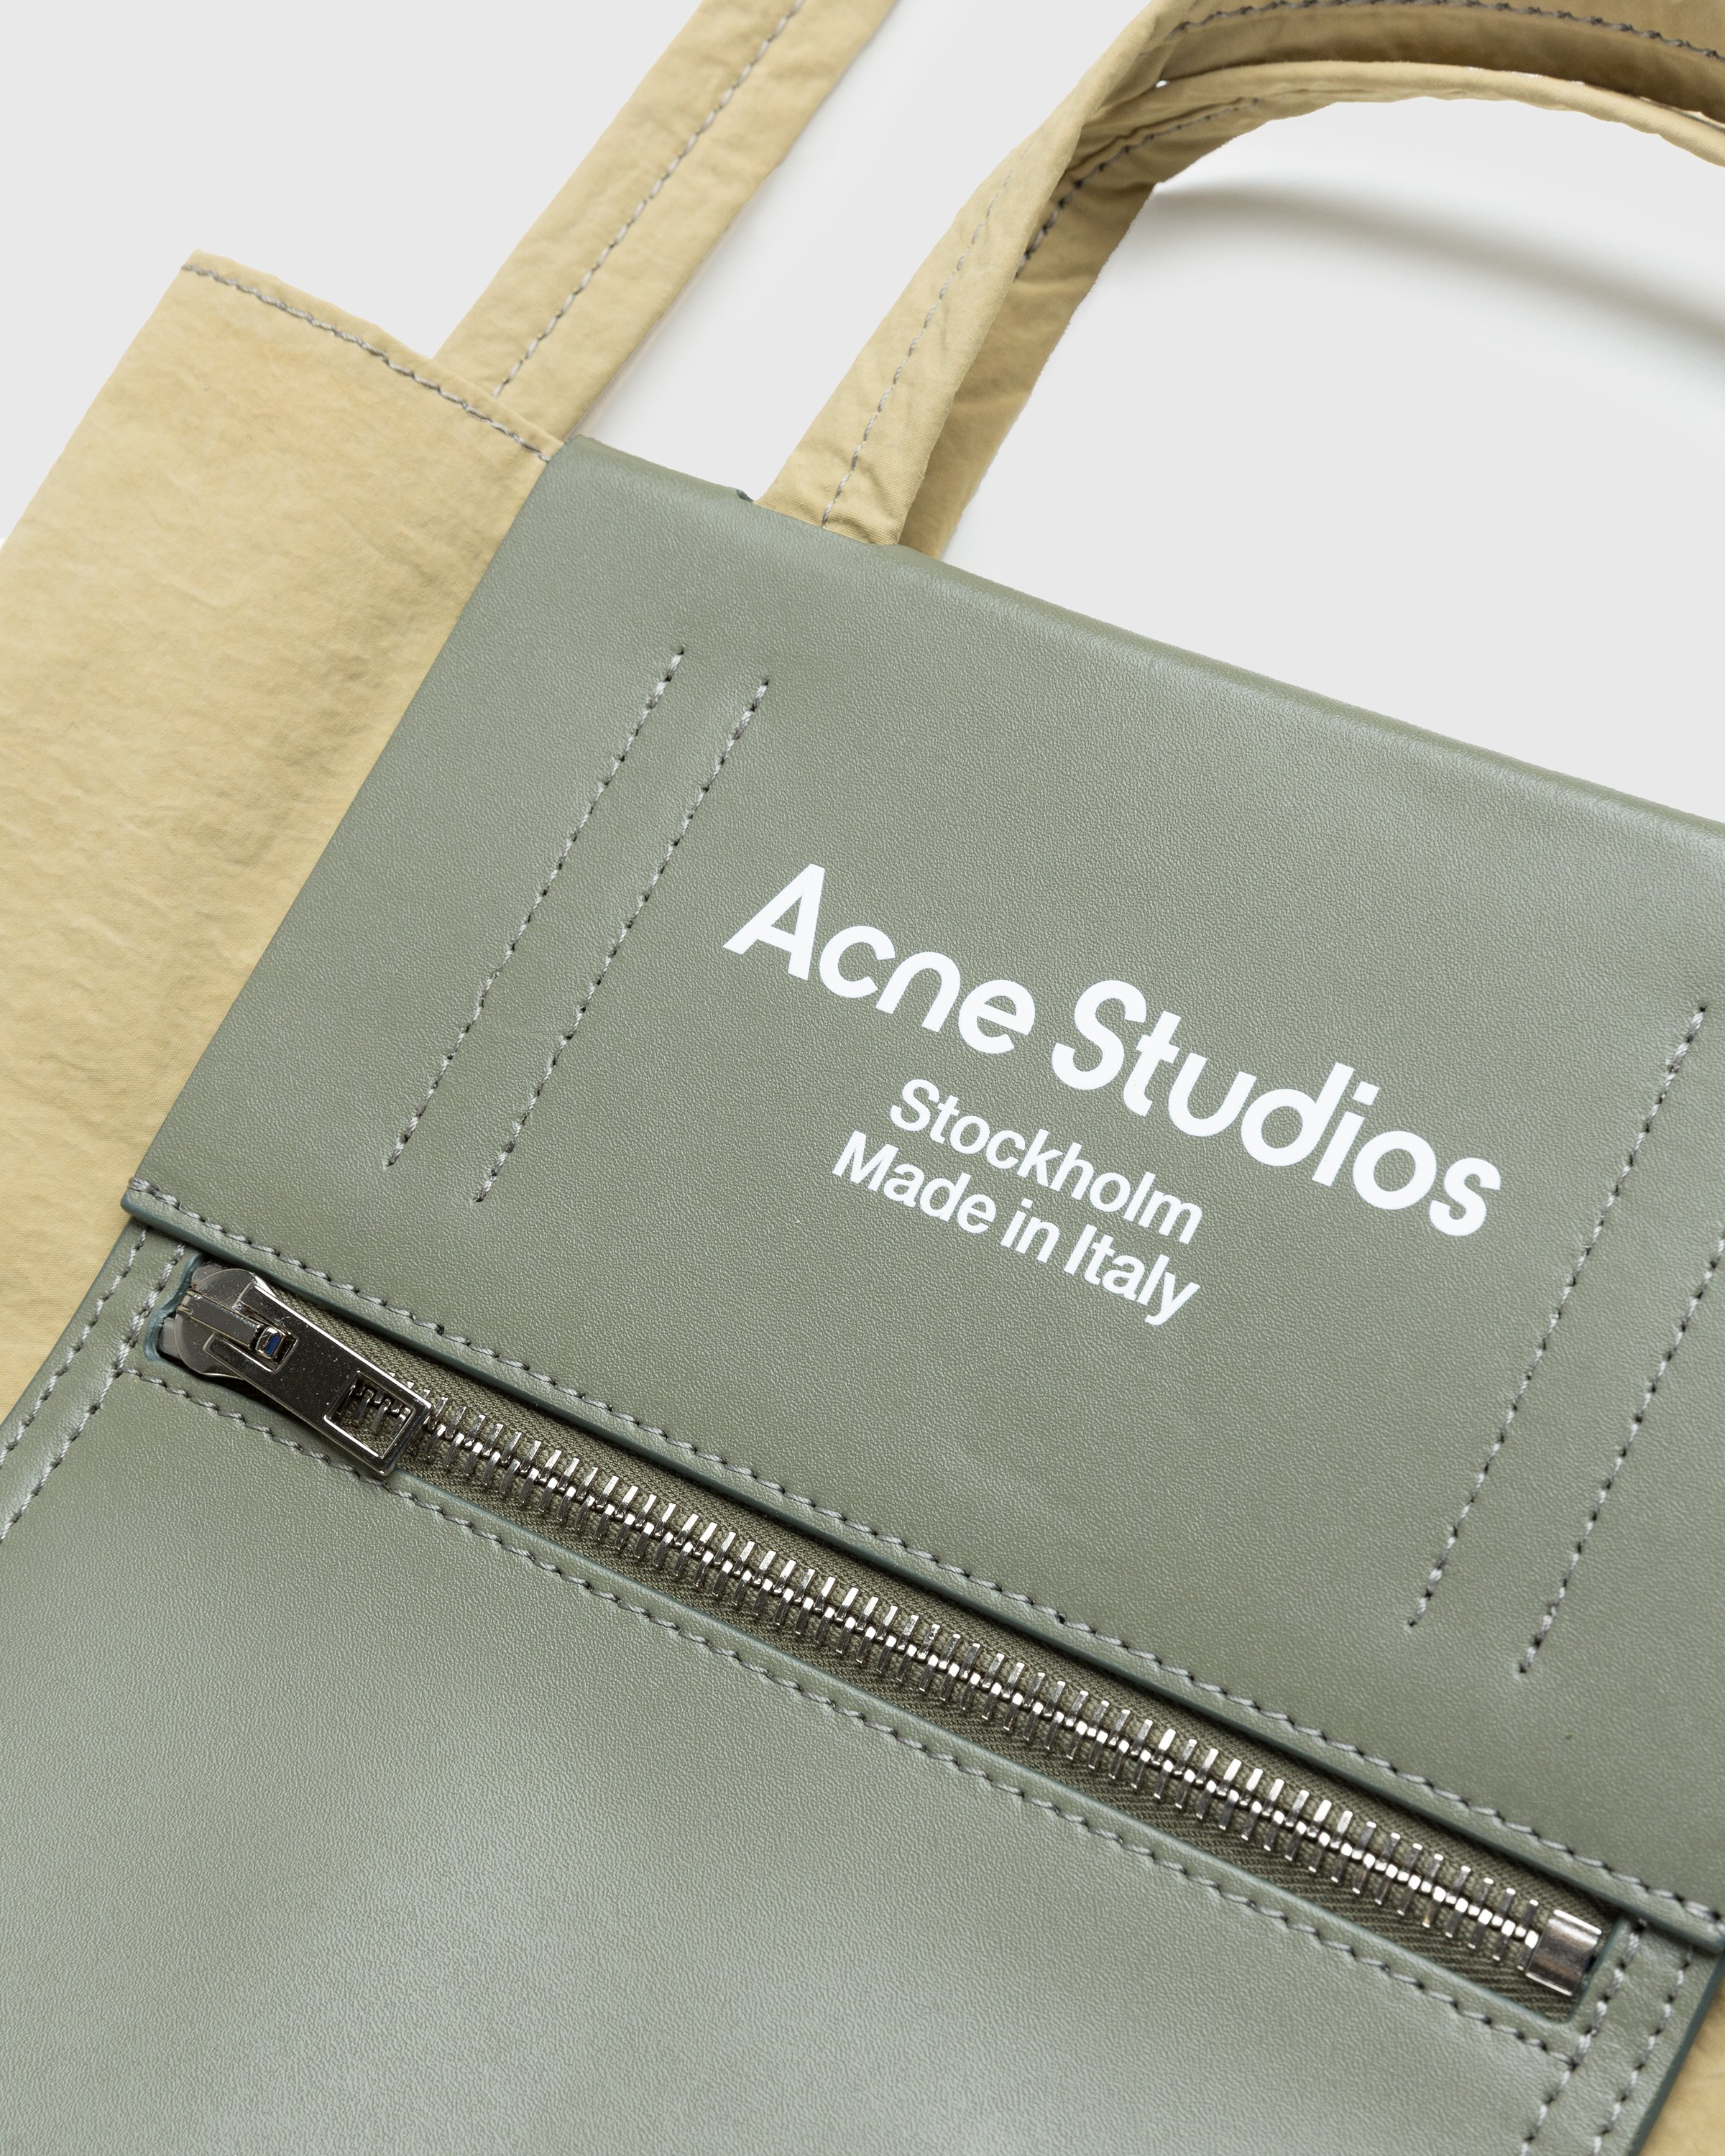 Acne Studios - Recycled Nylon Tote Bag Olive Green - Accessories - Beige - Image 5